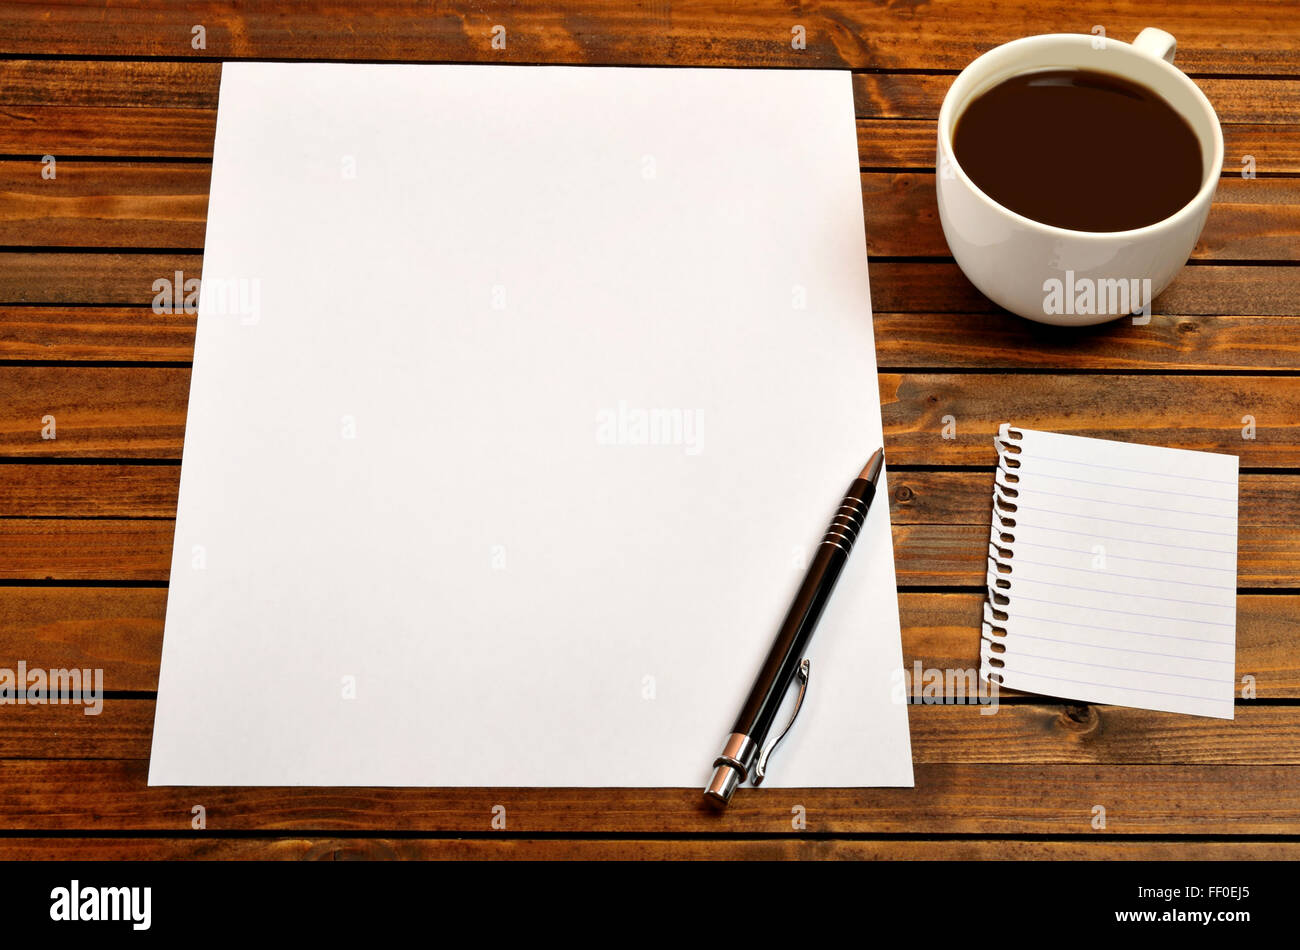 Empty paper with cup of coffee on desk Stock Photo